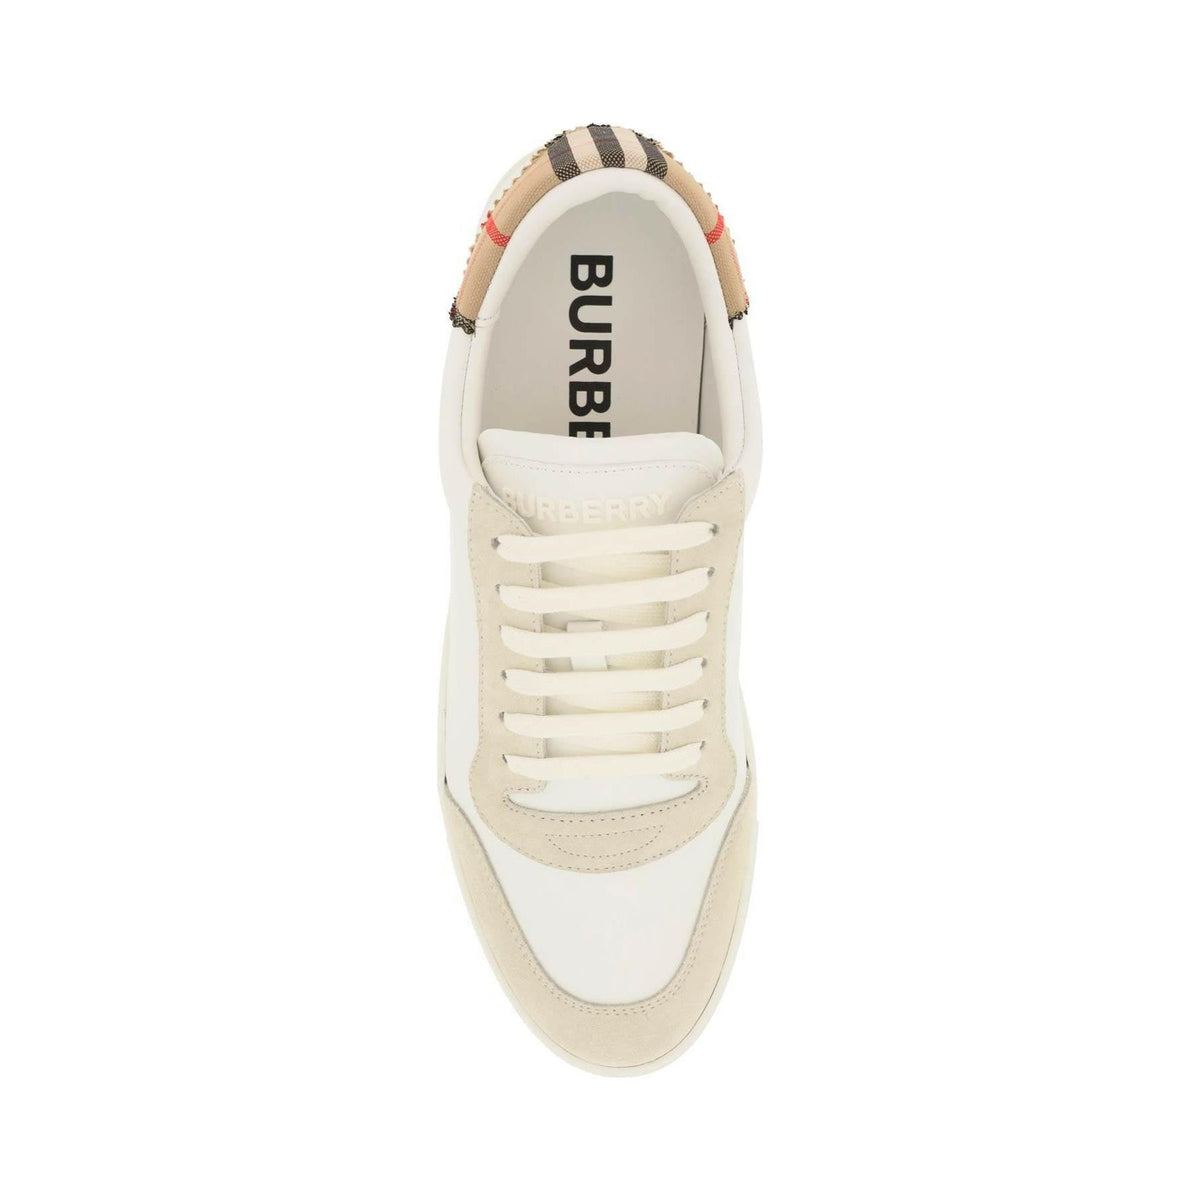 BURBERRY - Neutral White Leather, Suede and Check Cotton Sneakers - JOHN JULIA